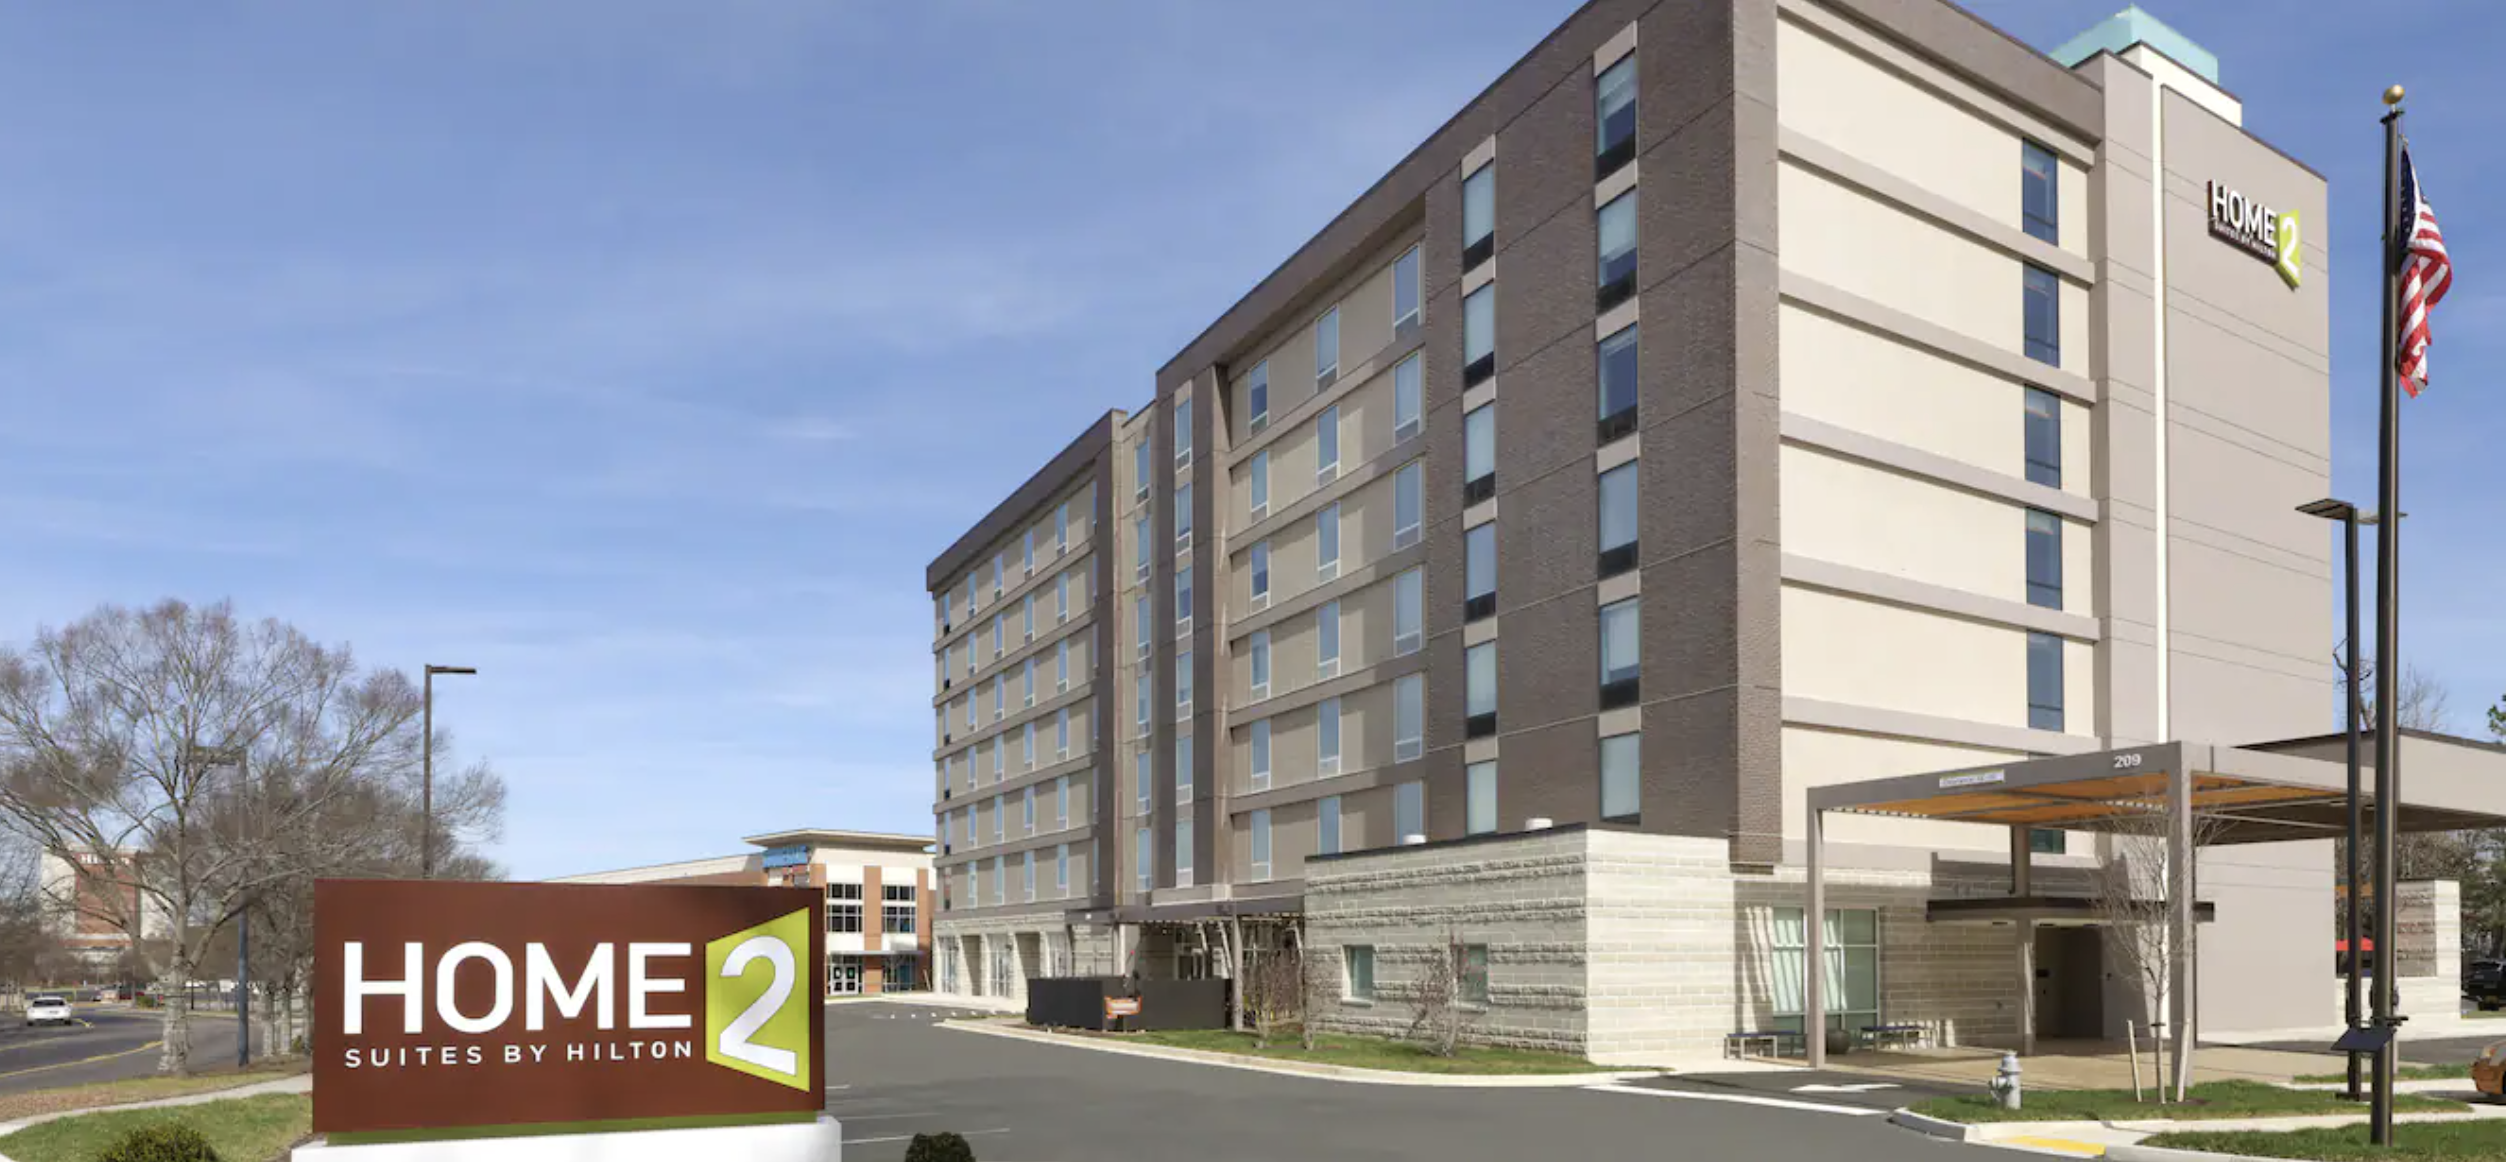 Shamin Hotels Announces The Opening Of The New Home2 Suites Richmond Short Pump